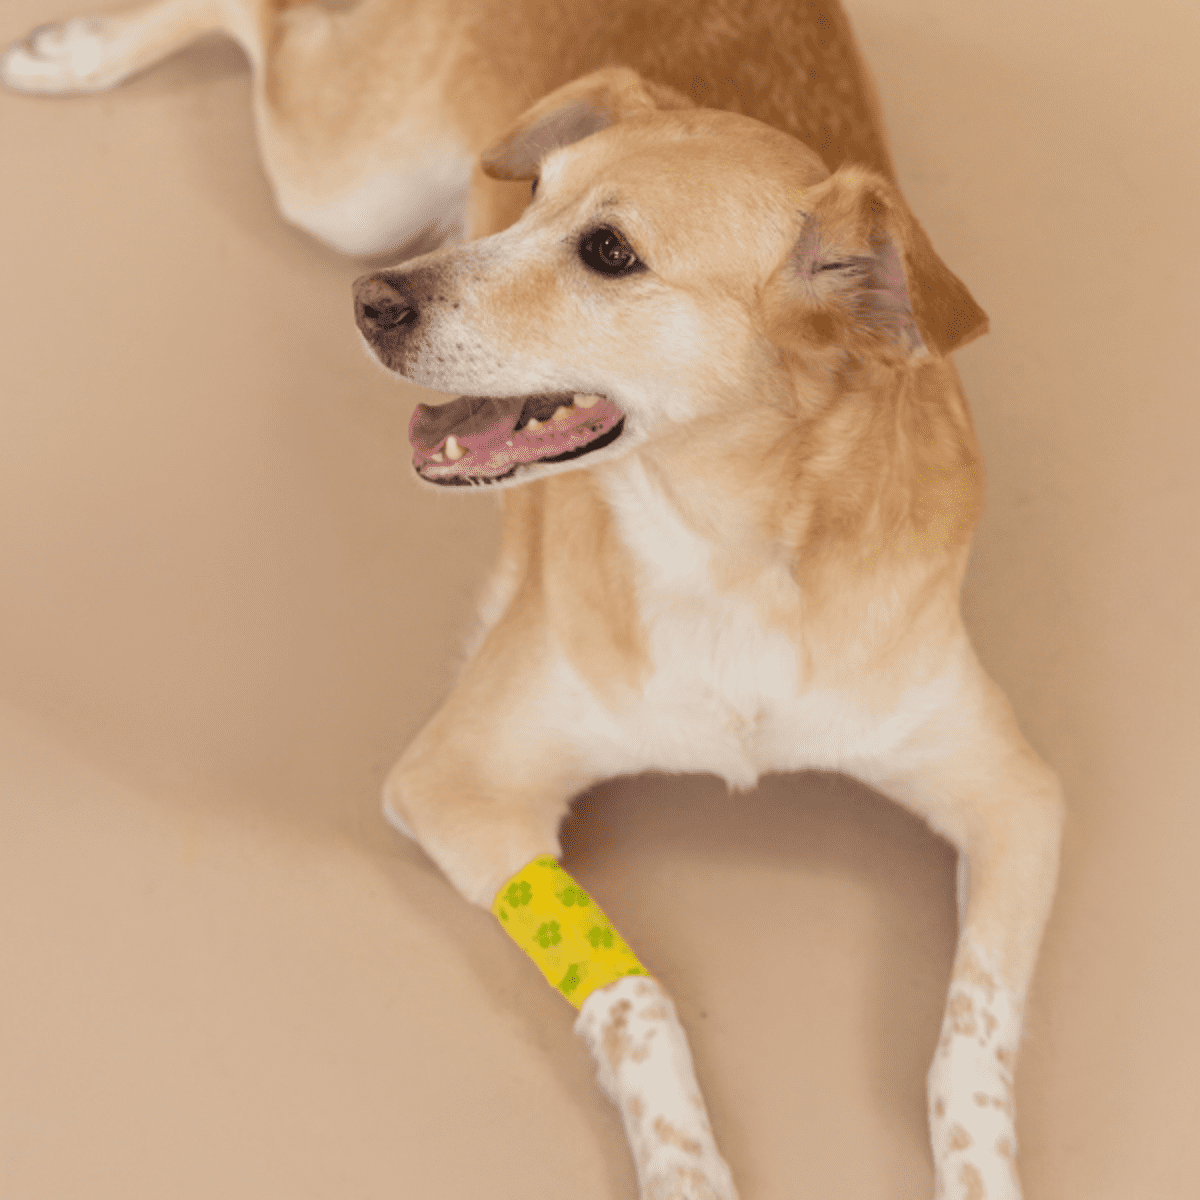 how do you make a dog scab heal faster